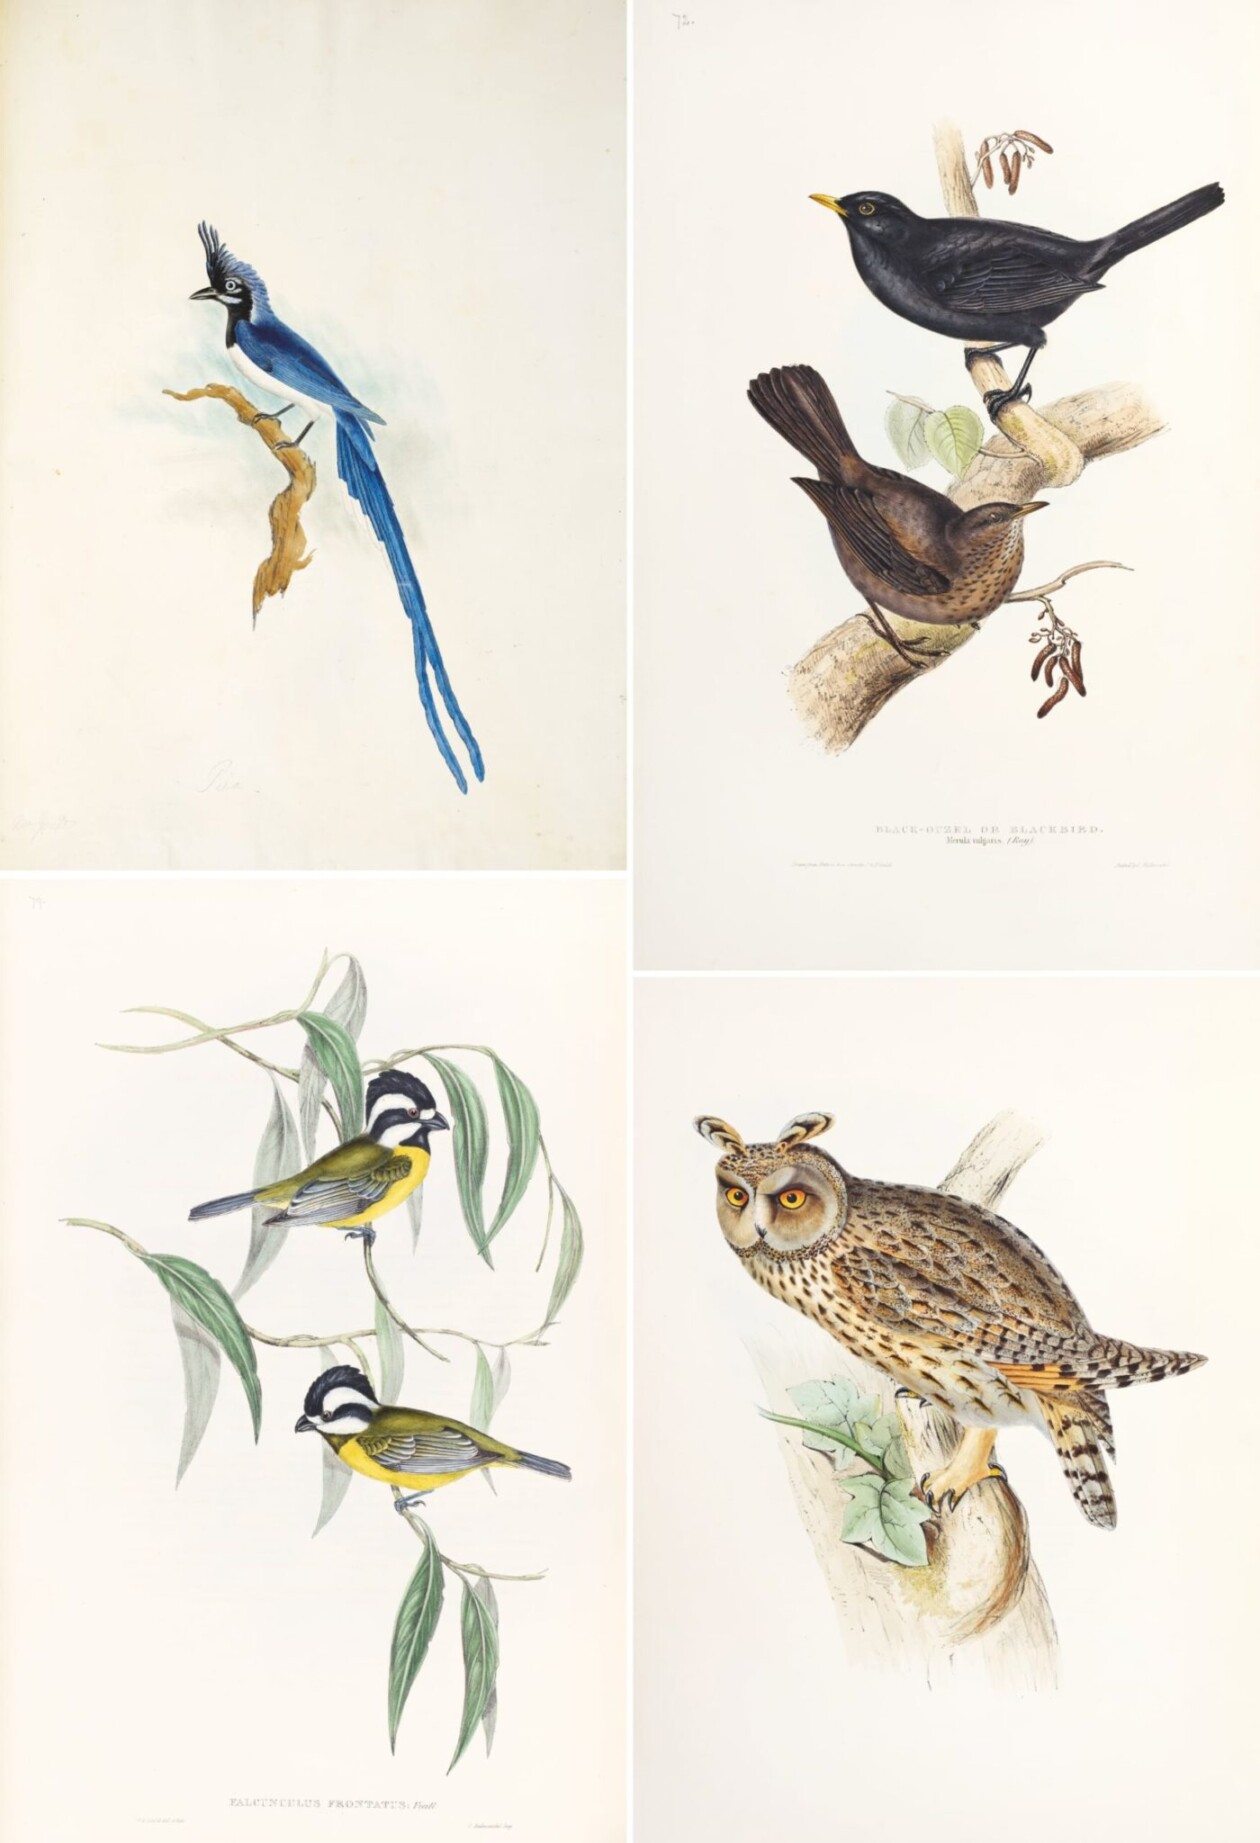 Birds Of Australia, Fascinating Illustrations From The 19th Century By Elizabeth Gould (15)